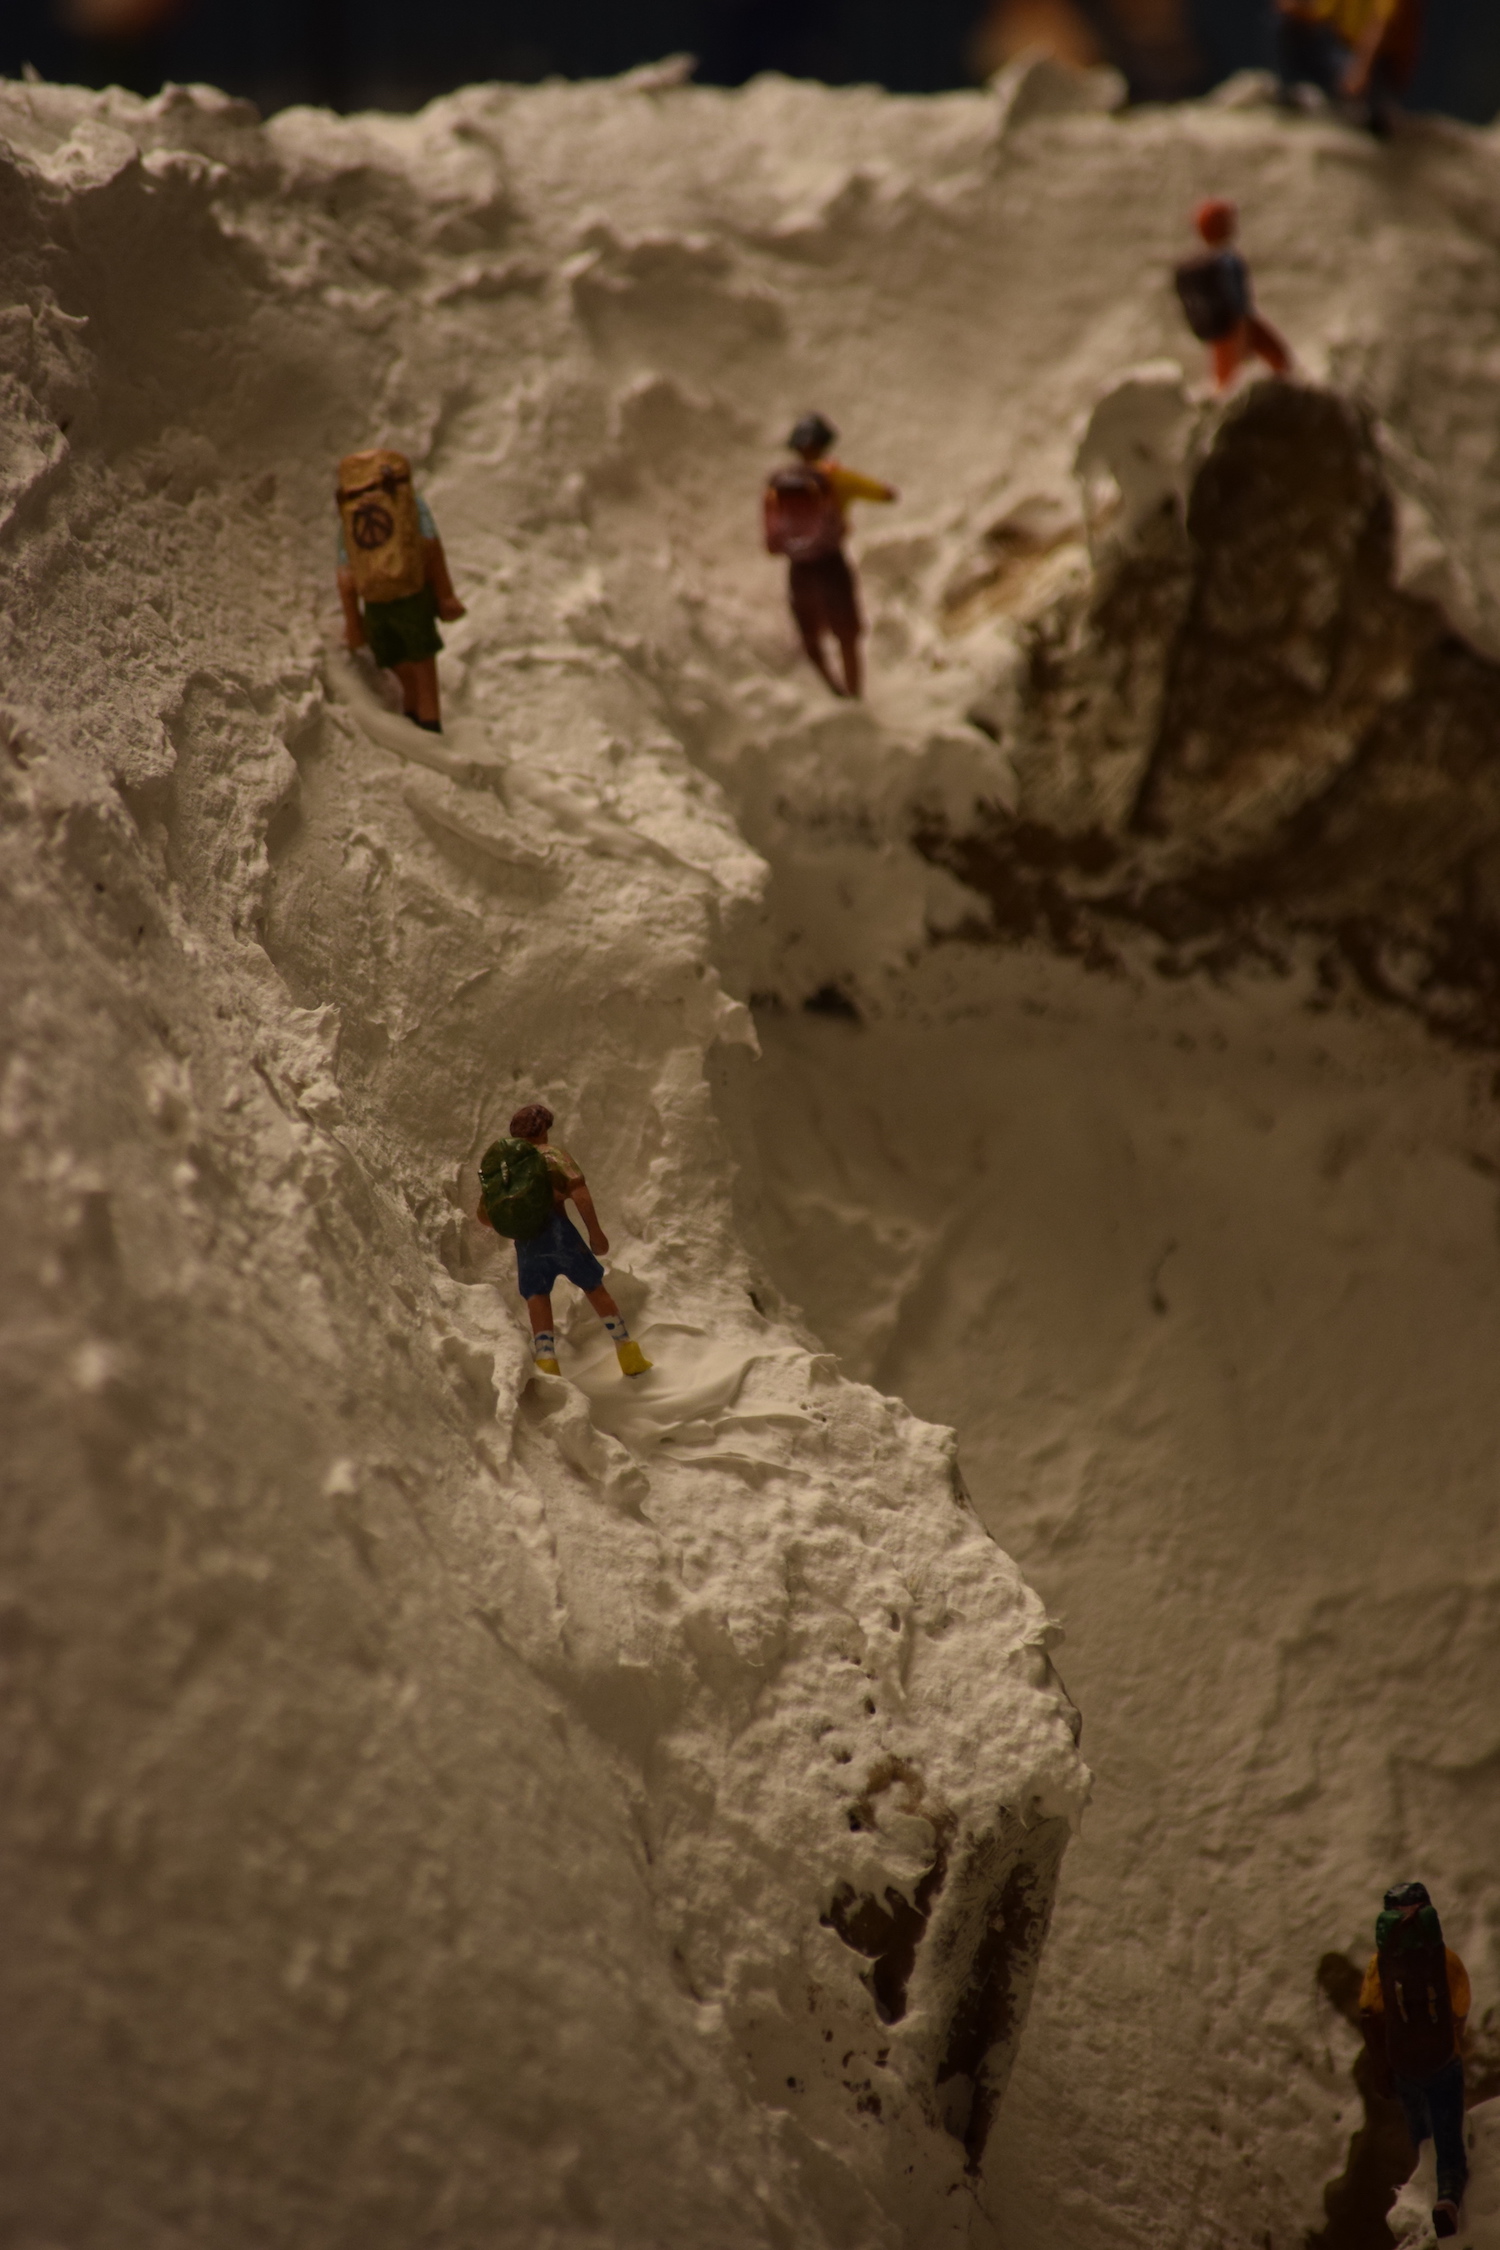 A snowy mountain scene with hikers - "Christmas at the Roundhouse" model train display.